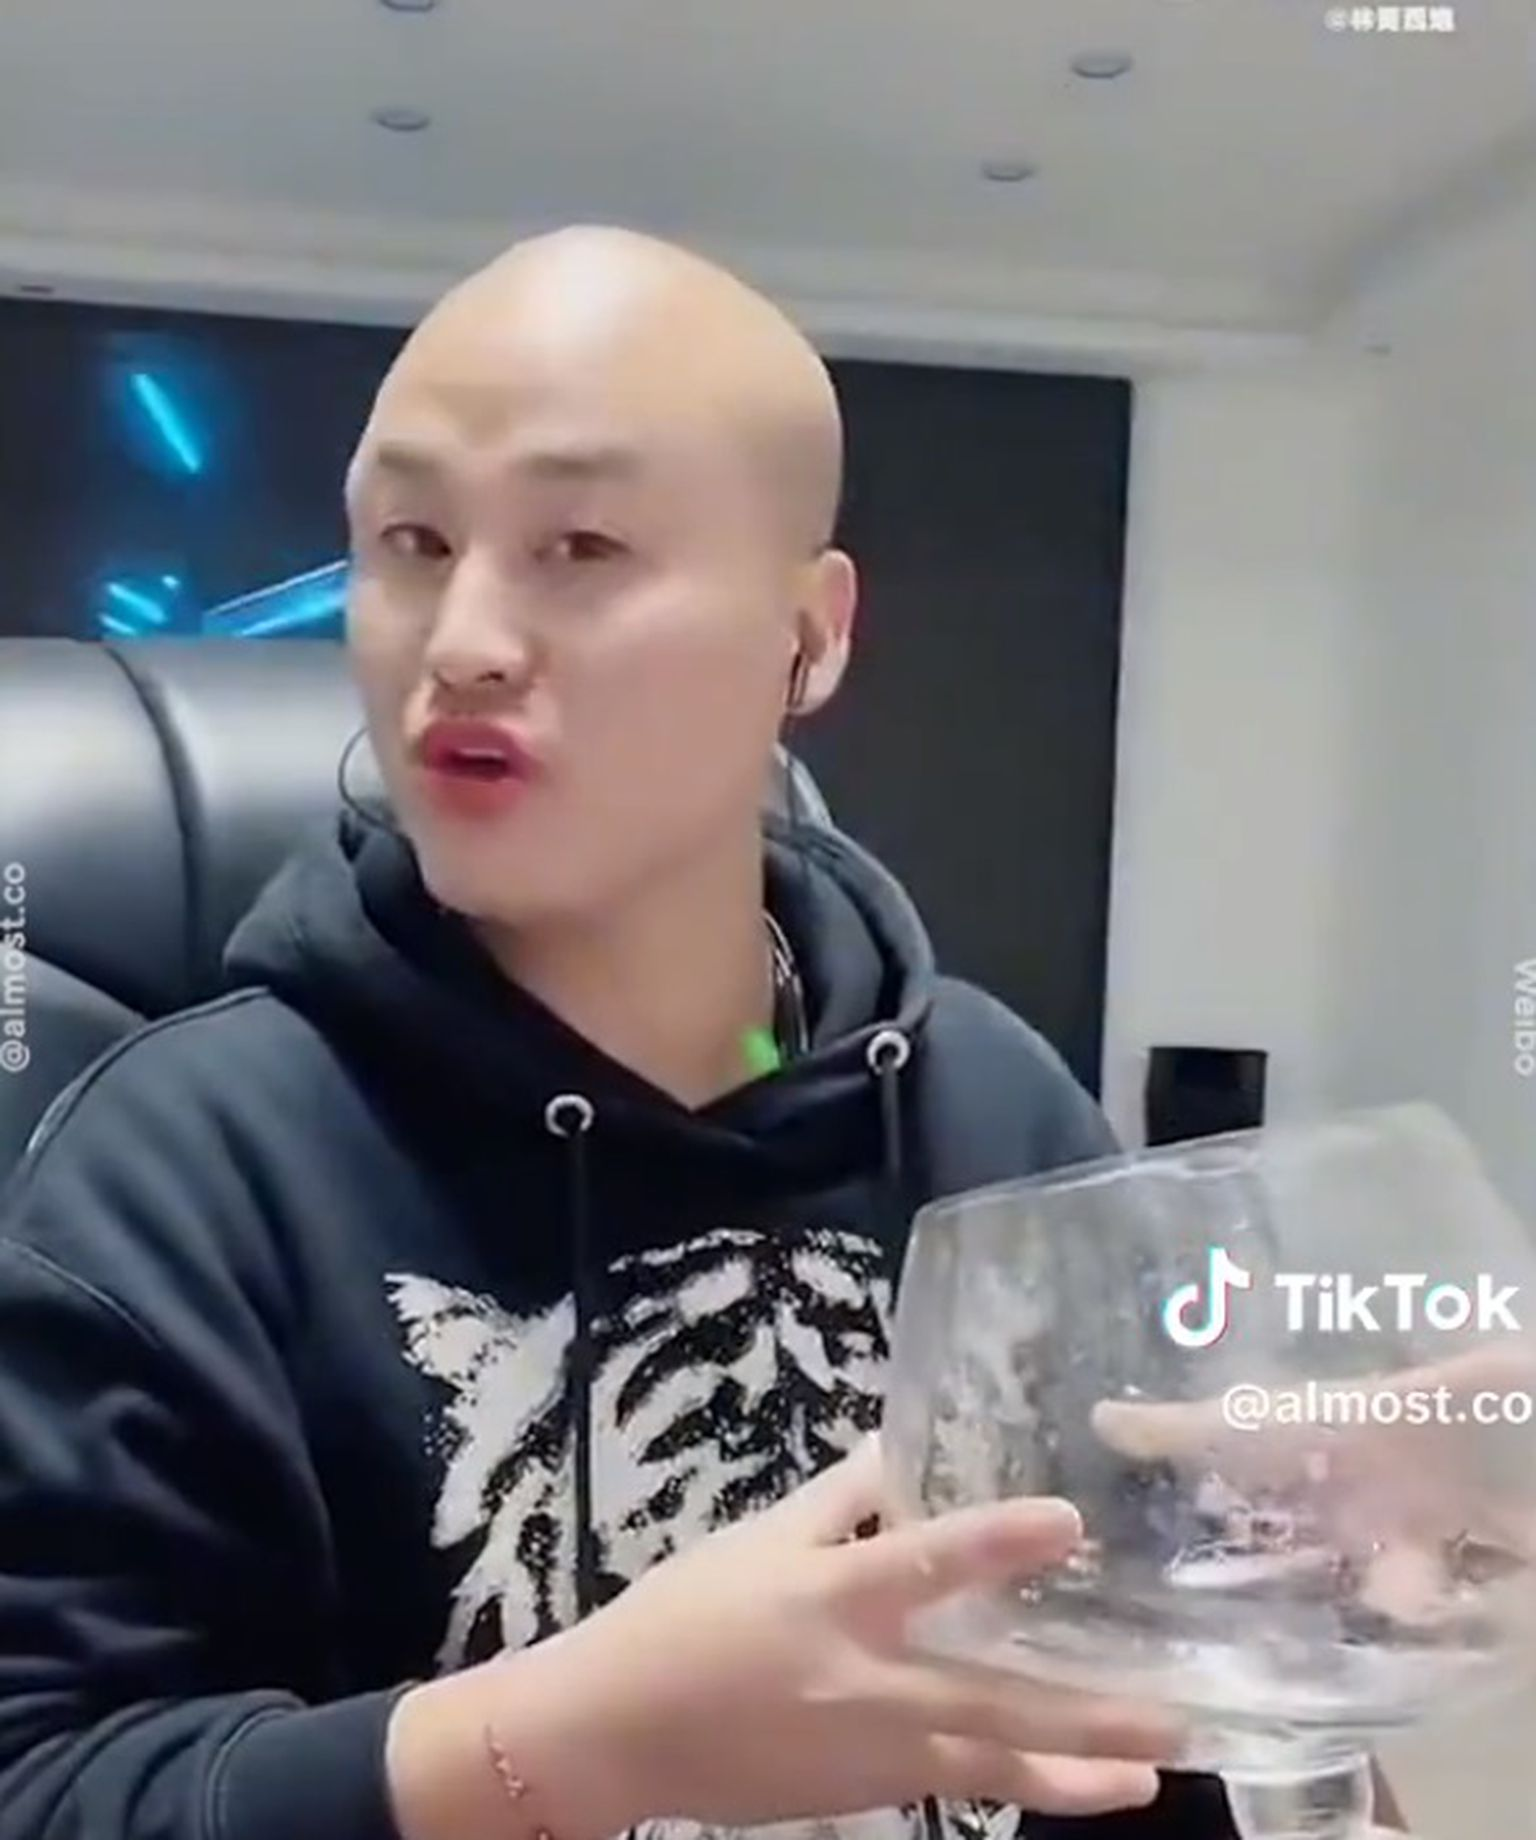 Sanqiange was famous for creating alcohol themed content on the Chinese version of TikTok